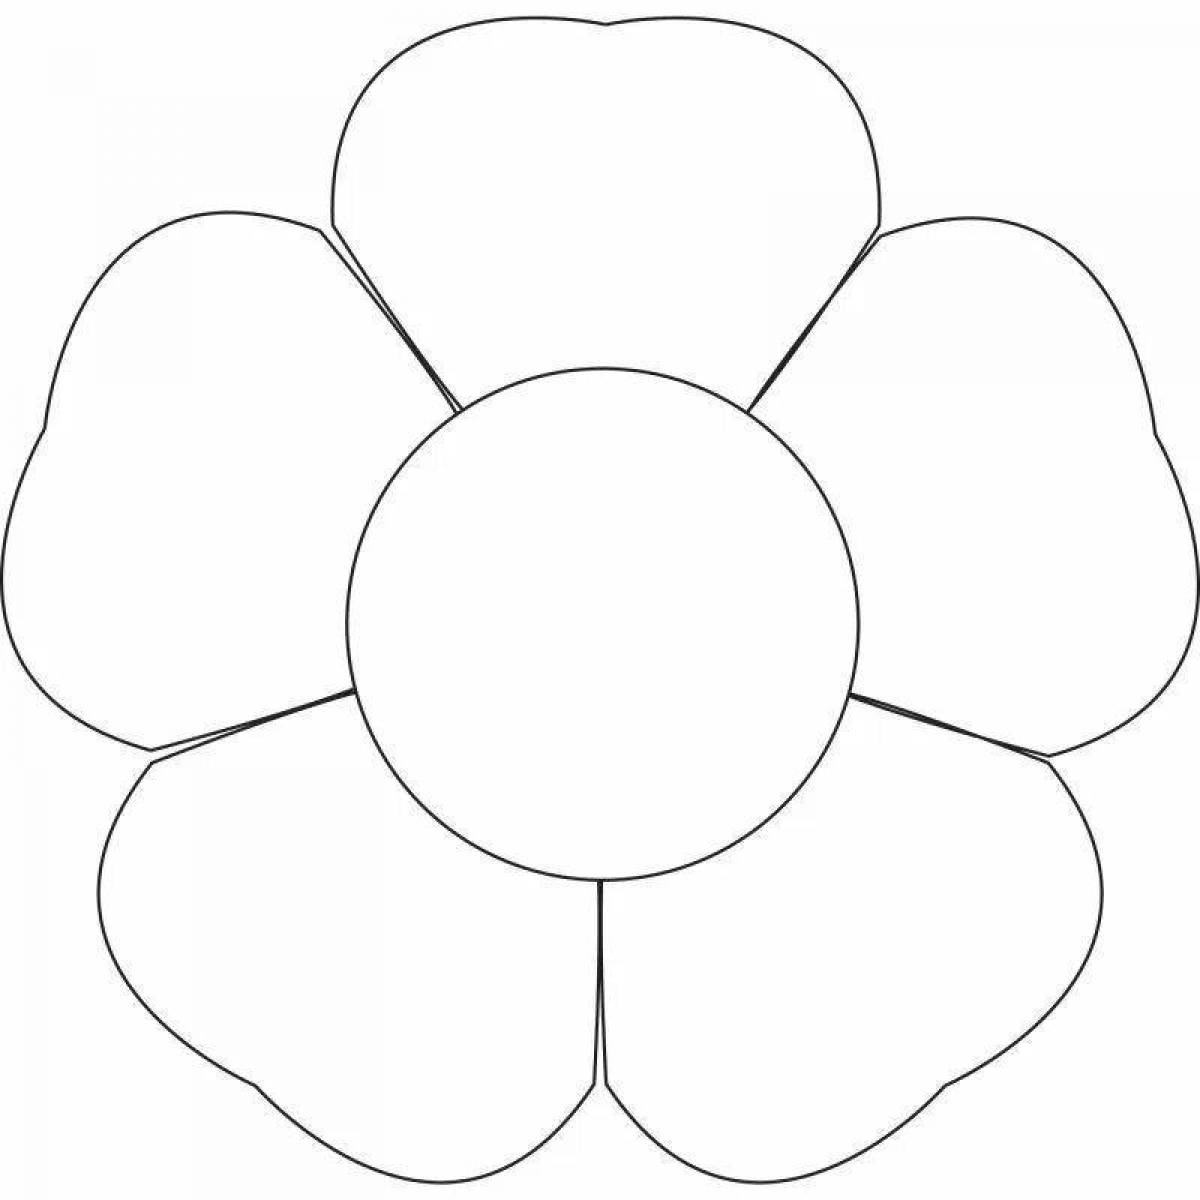 Adorable flower pattern coloring page